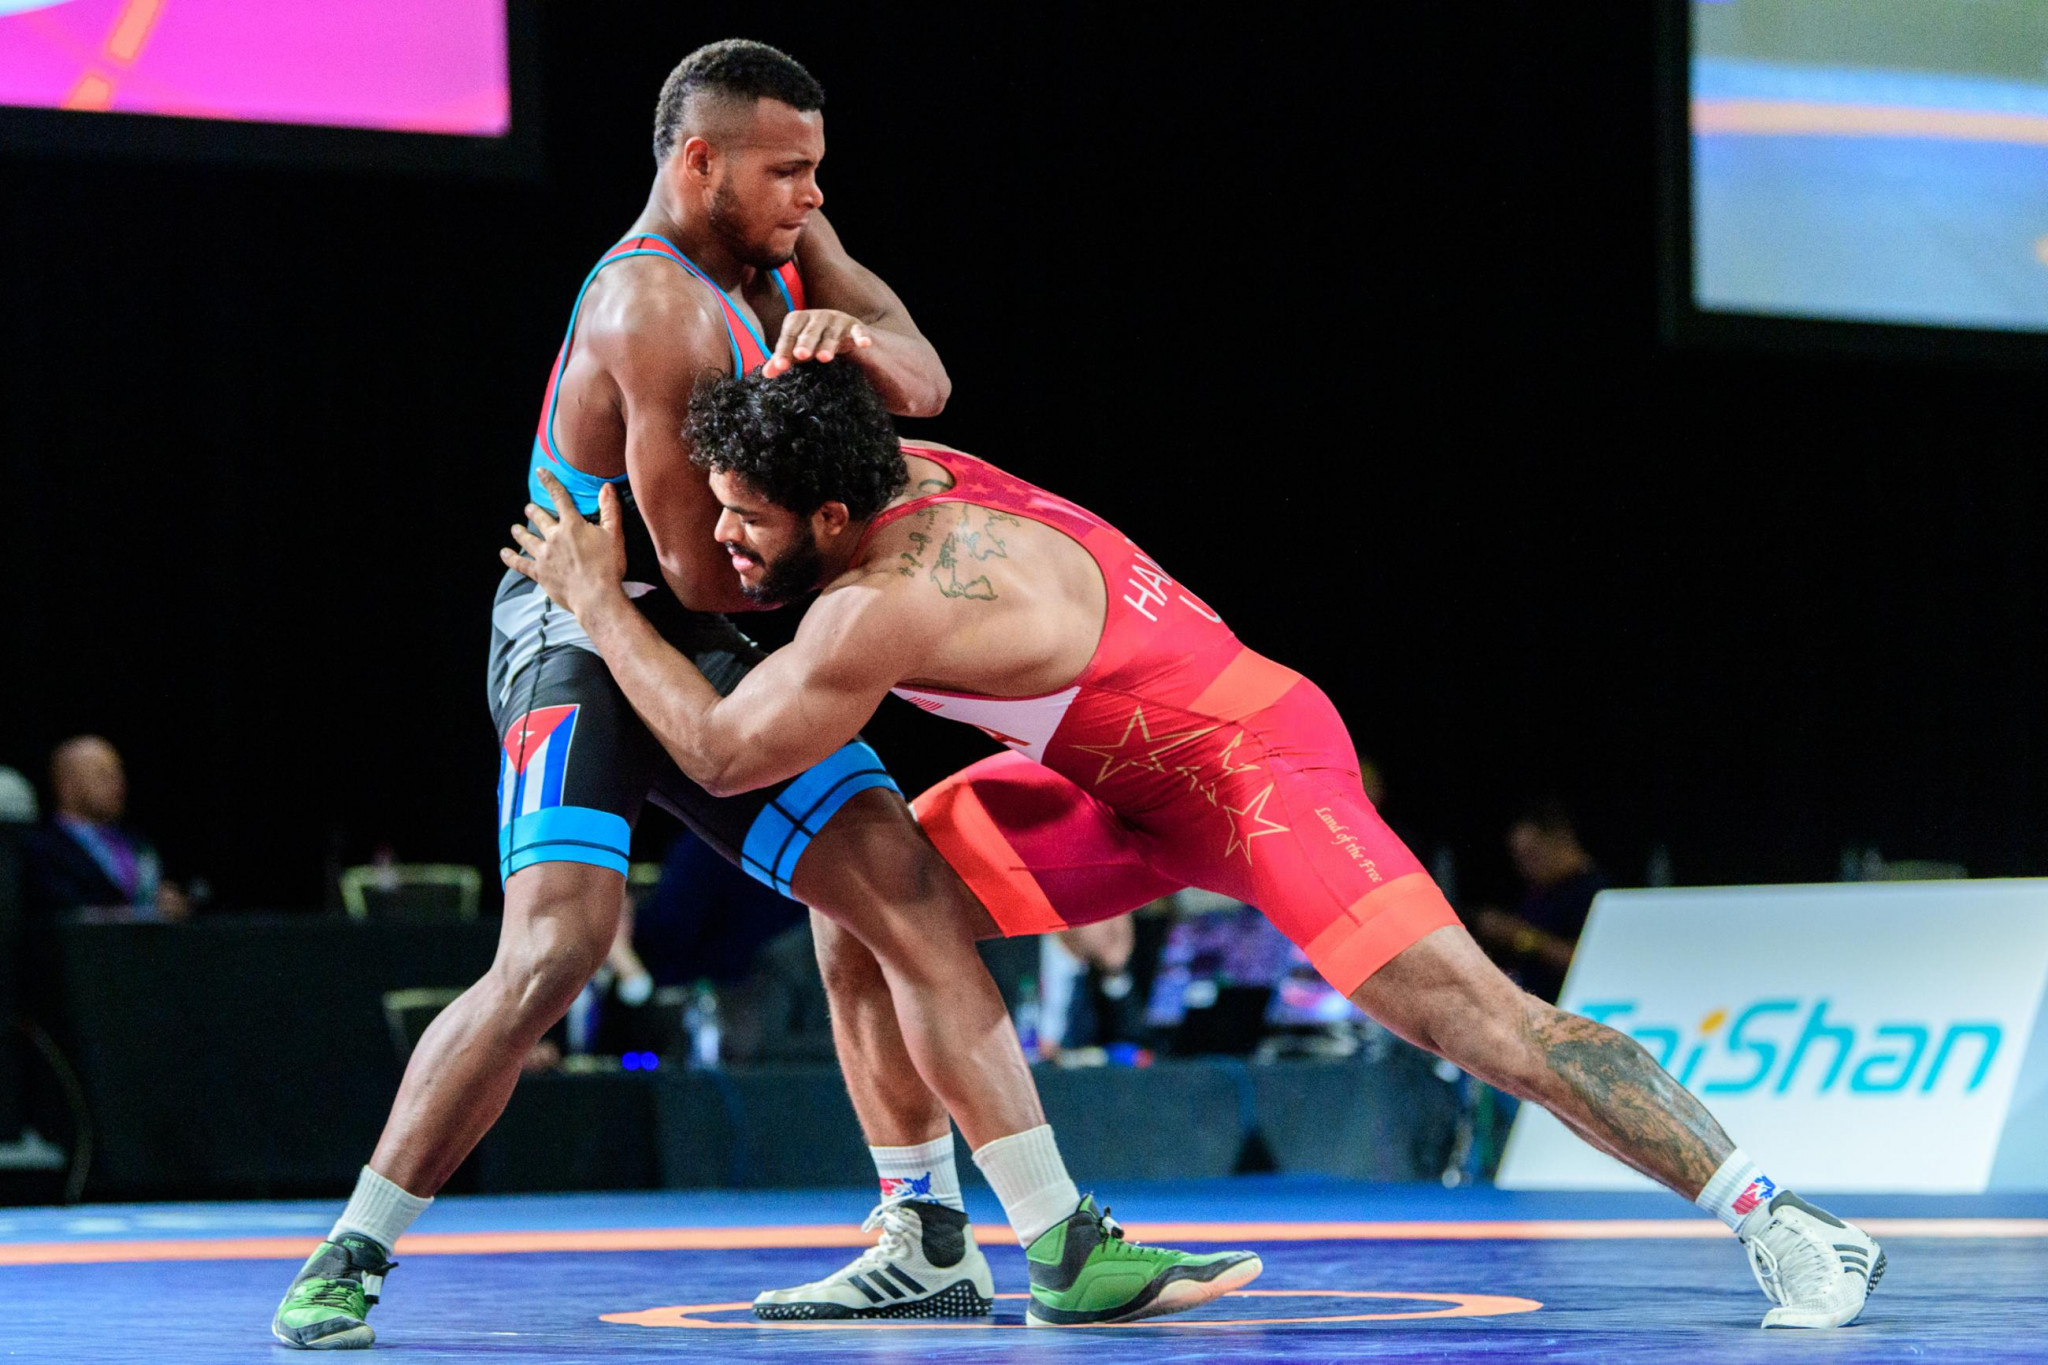 United States win three golds on day one of Pan American Wrestling Championships in Ottawa